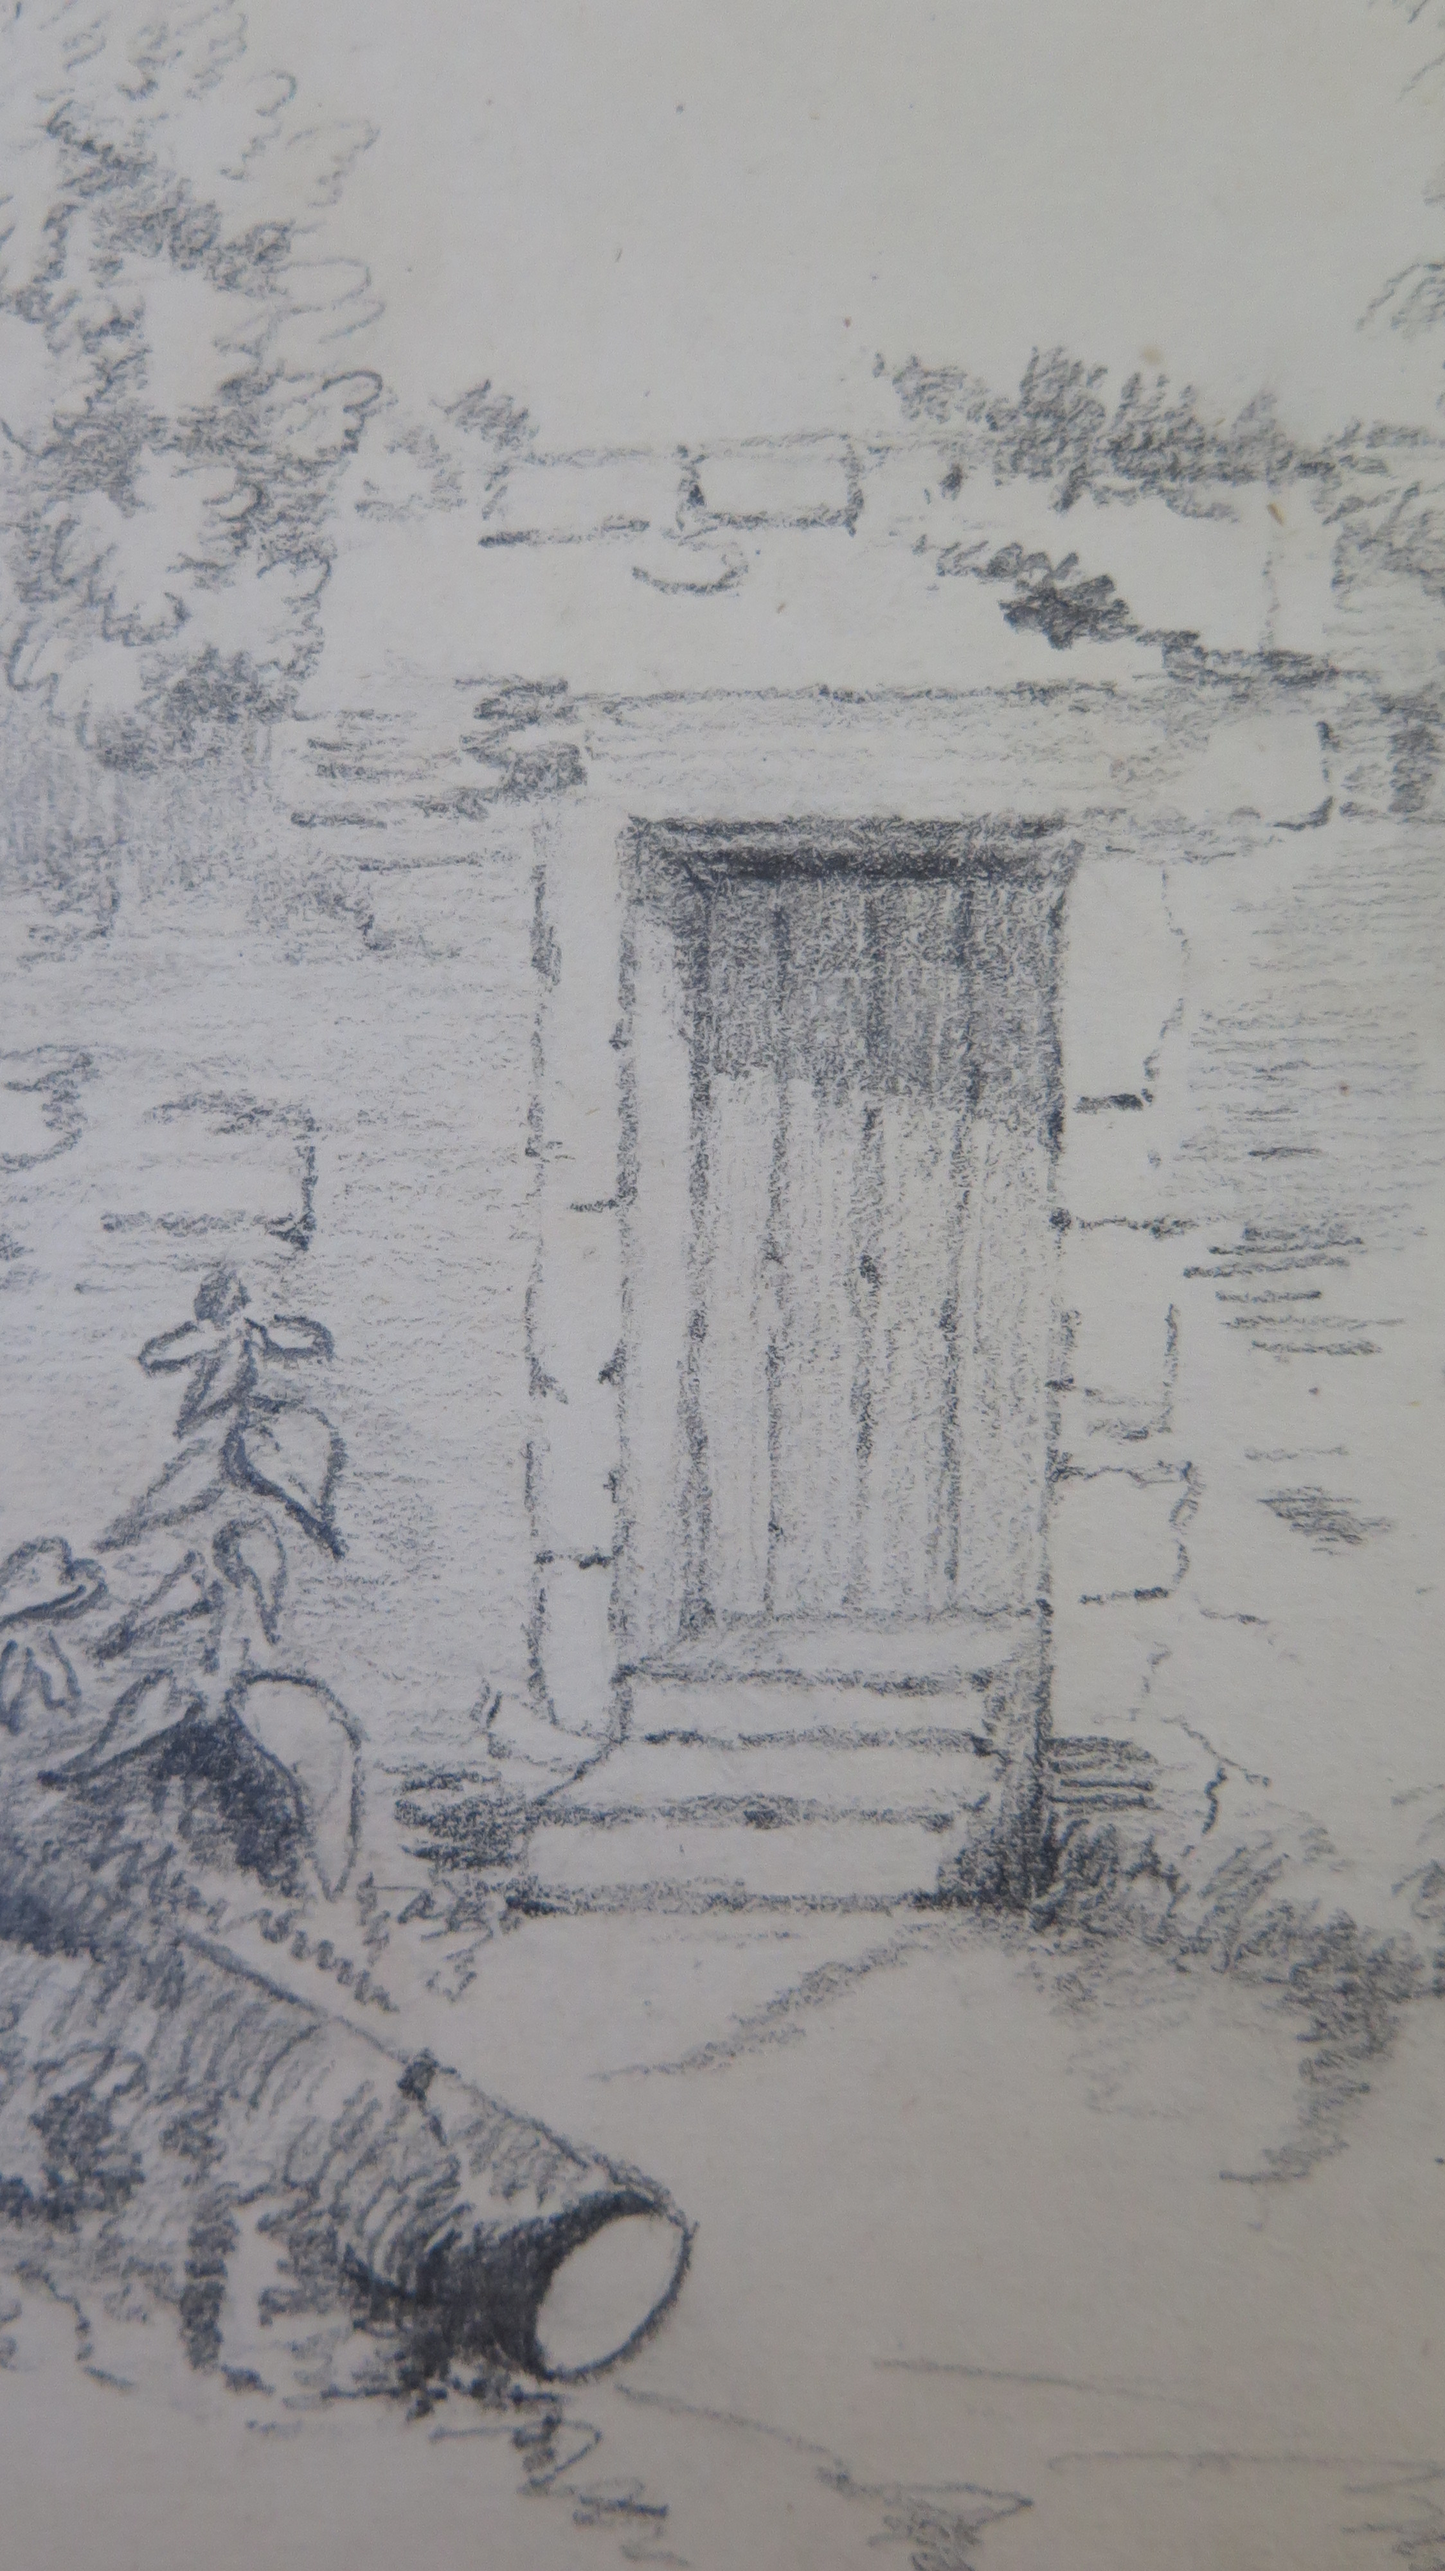 ANCIENT DRAWING OF VIEW OF COUNTRY HOUSE PAINTING PENCIL ON PAPER BM53.5b